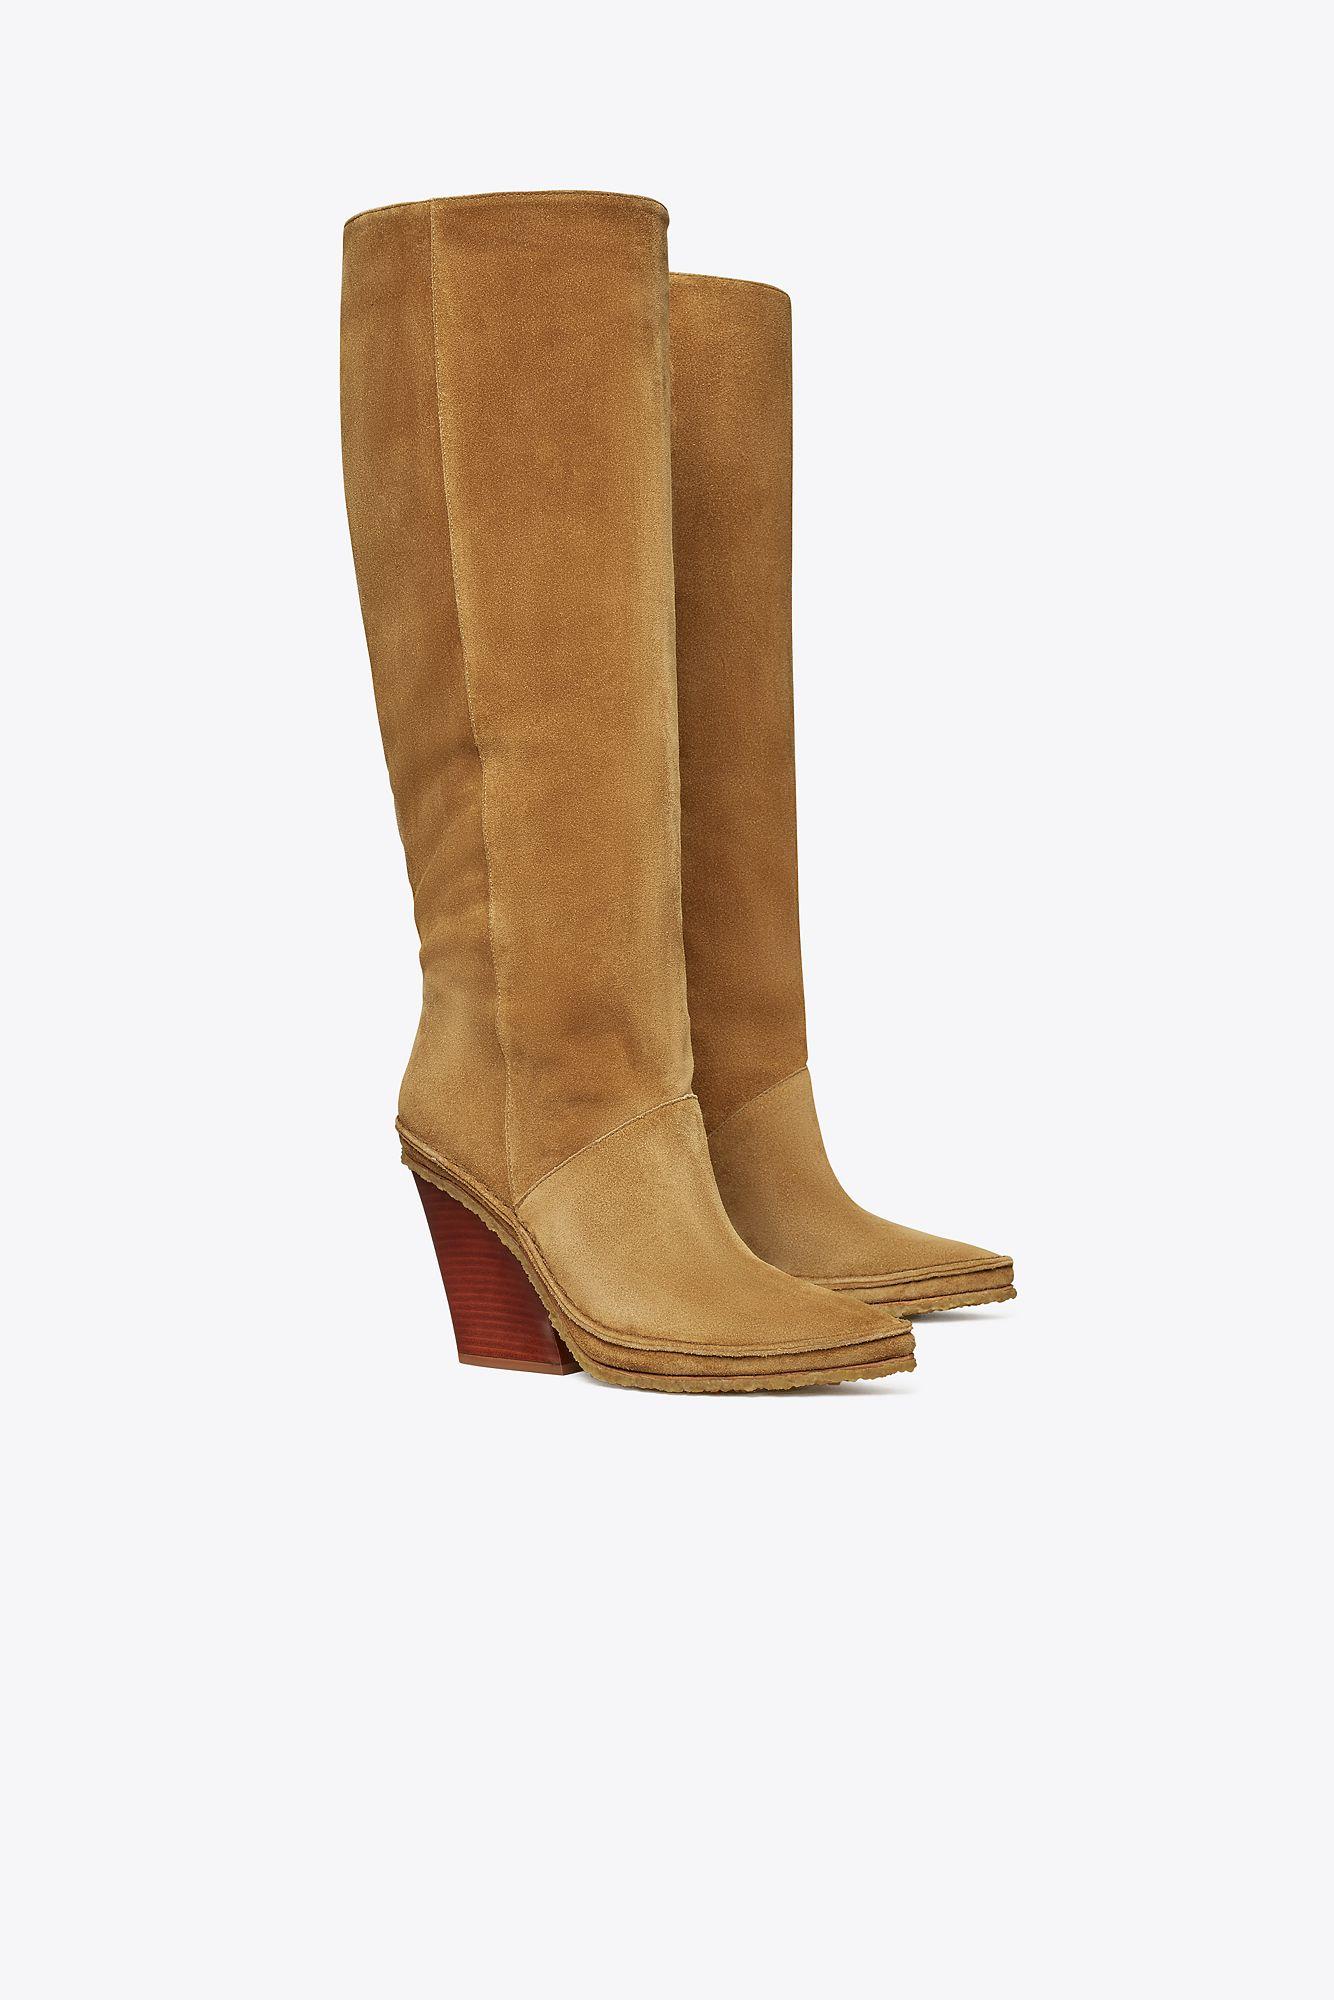 Tory Burch Lila Heeled Tall Boot in Brown | Lyst